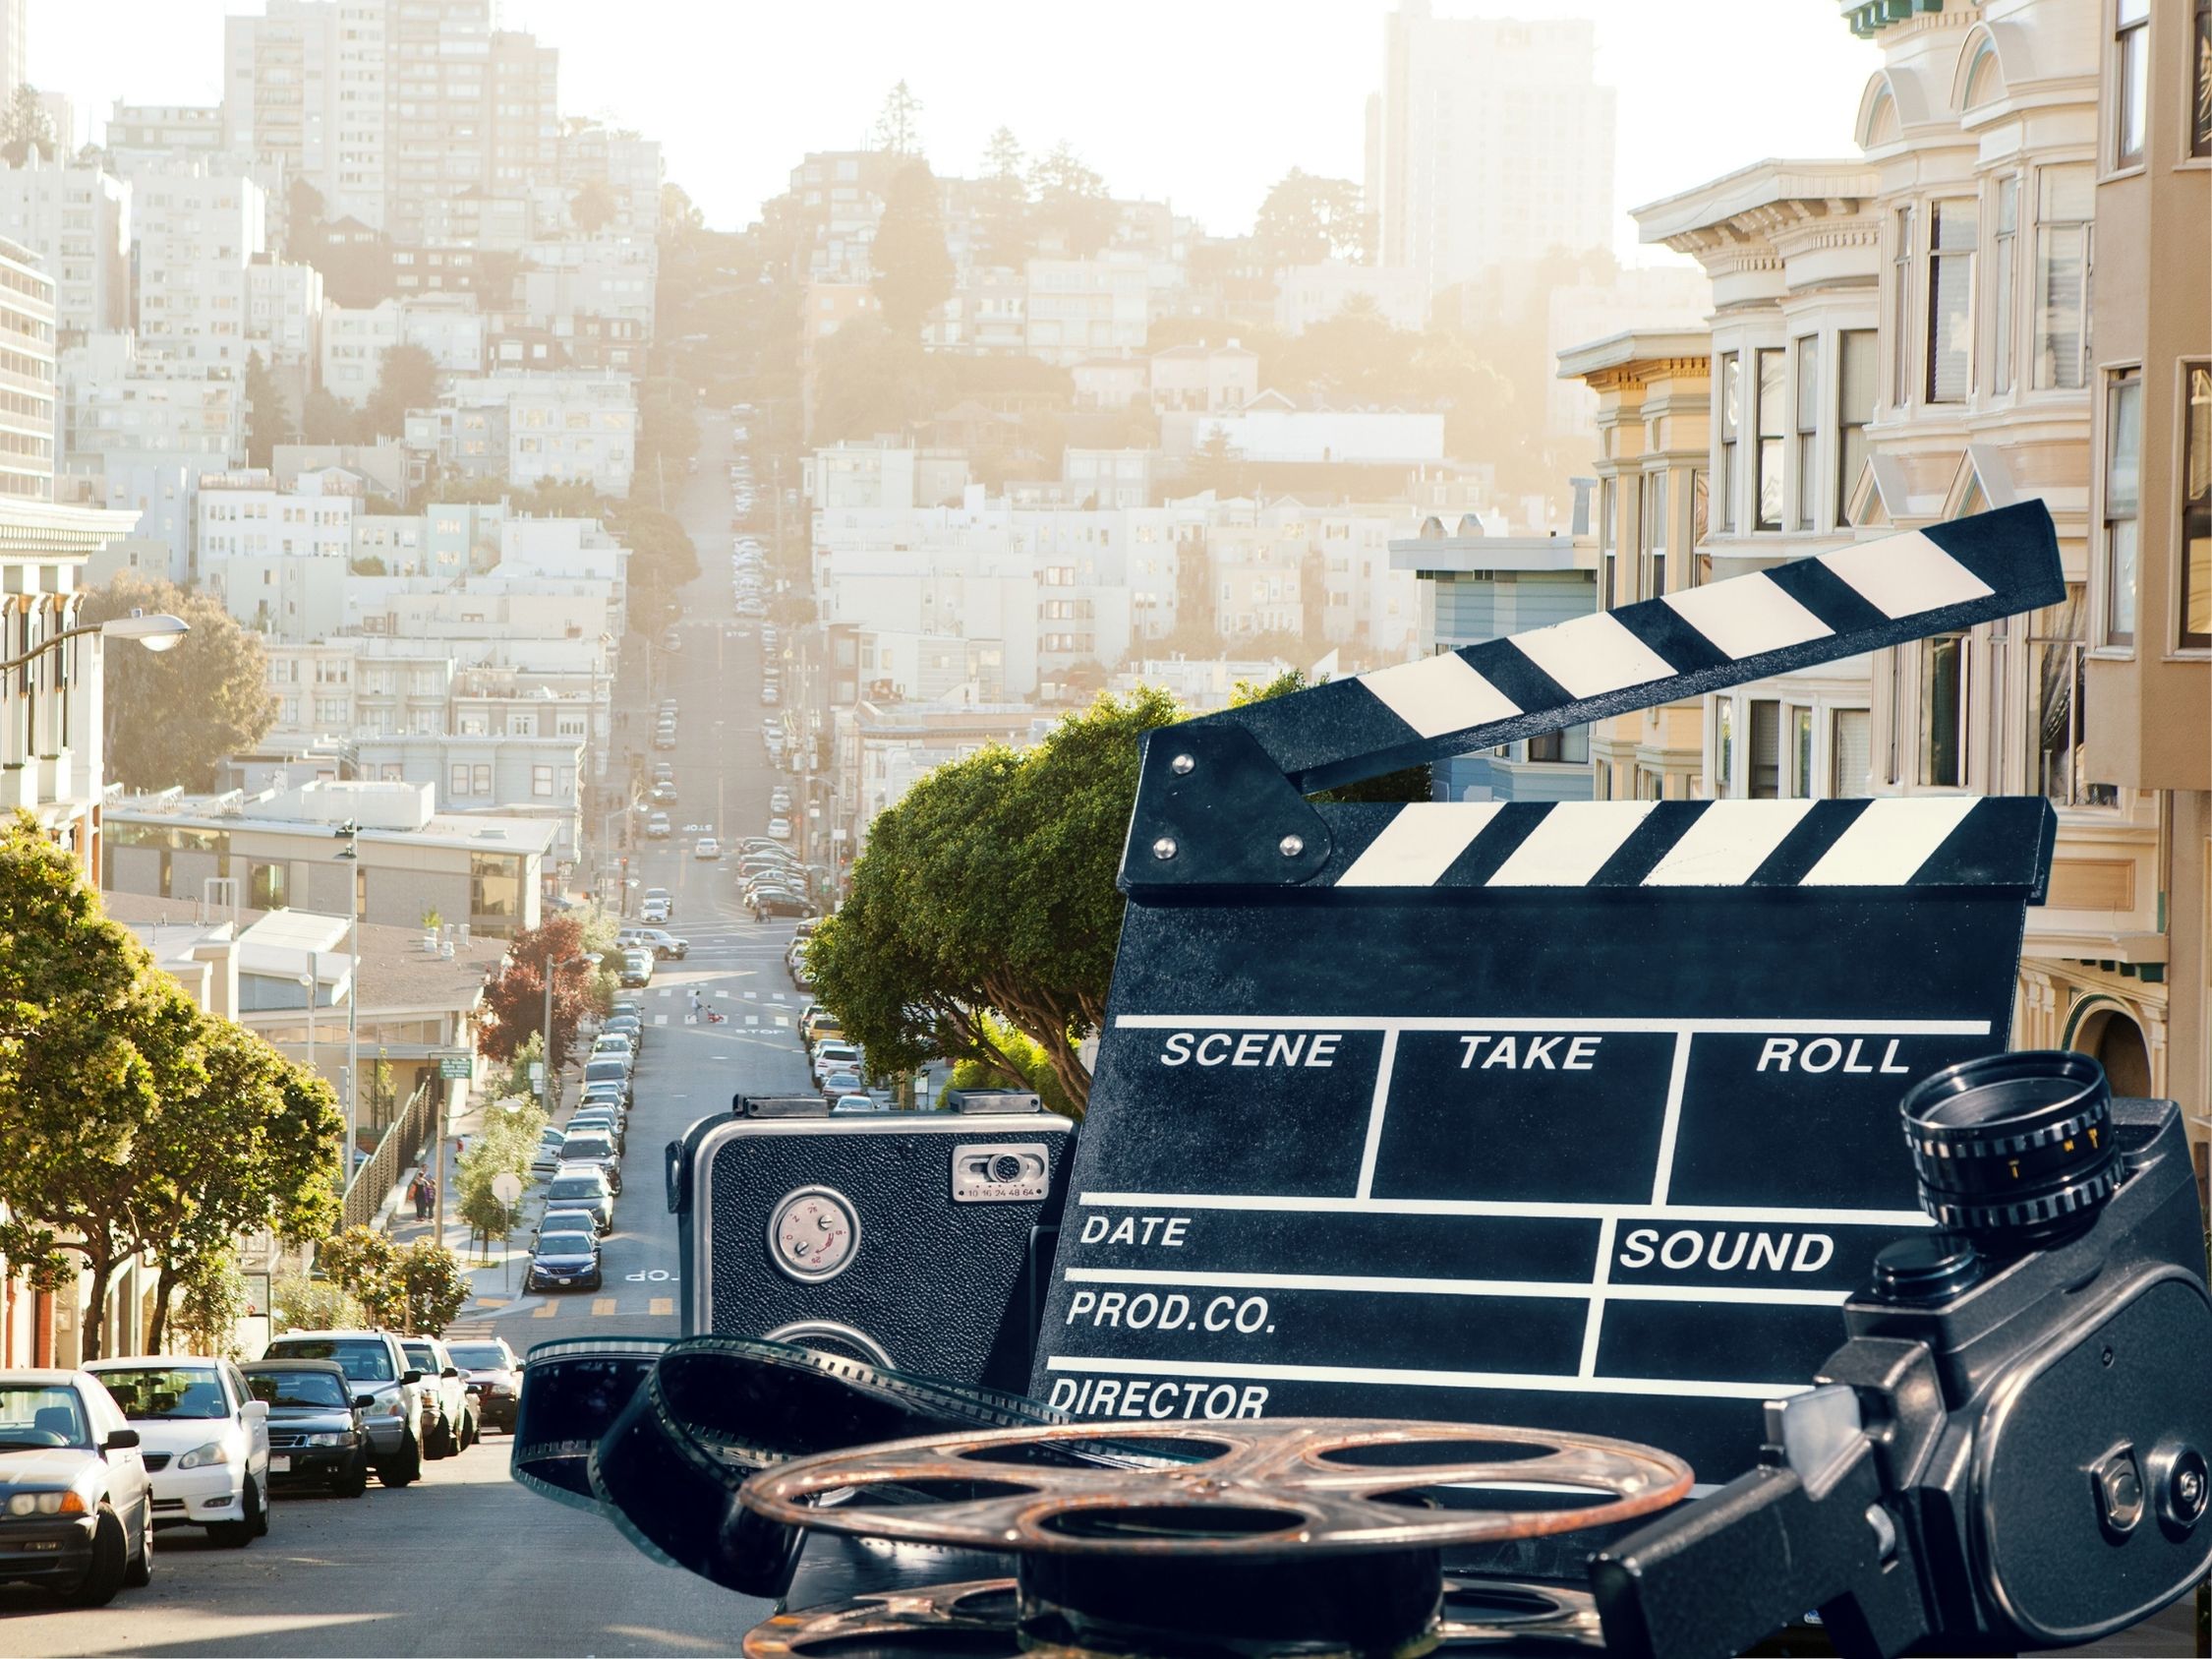 12 Extraordinary Movies Set In San Francisco That Will Inspire You To Visit!